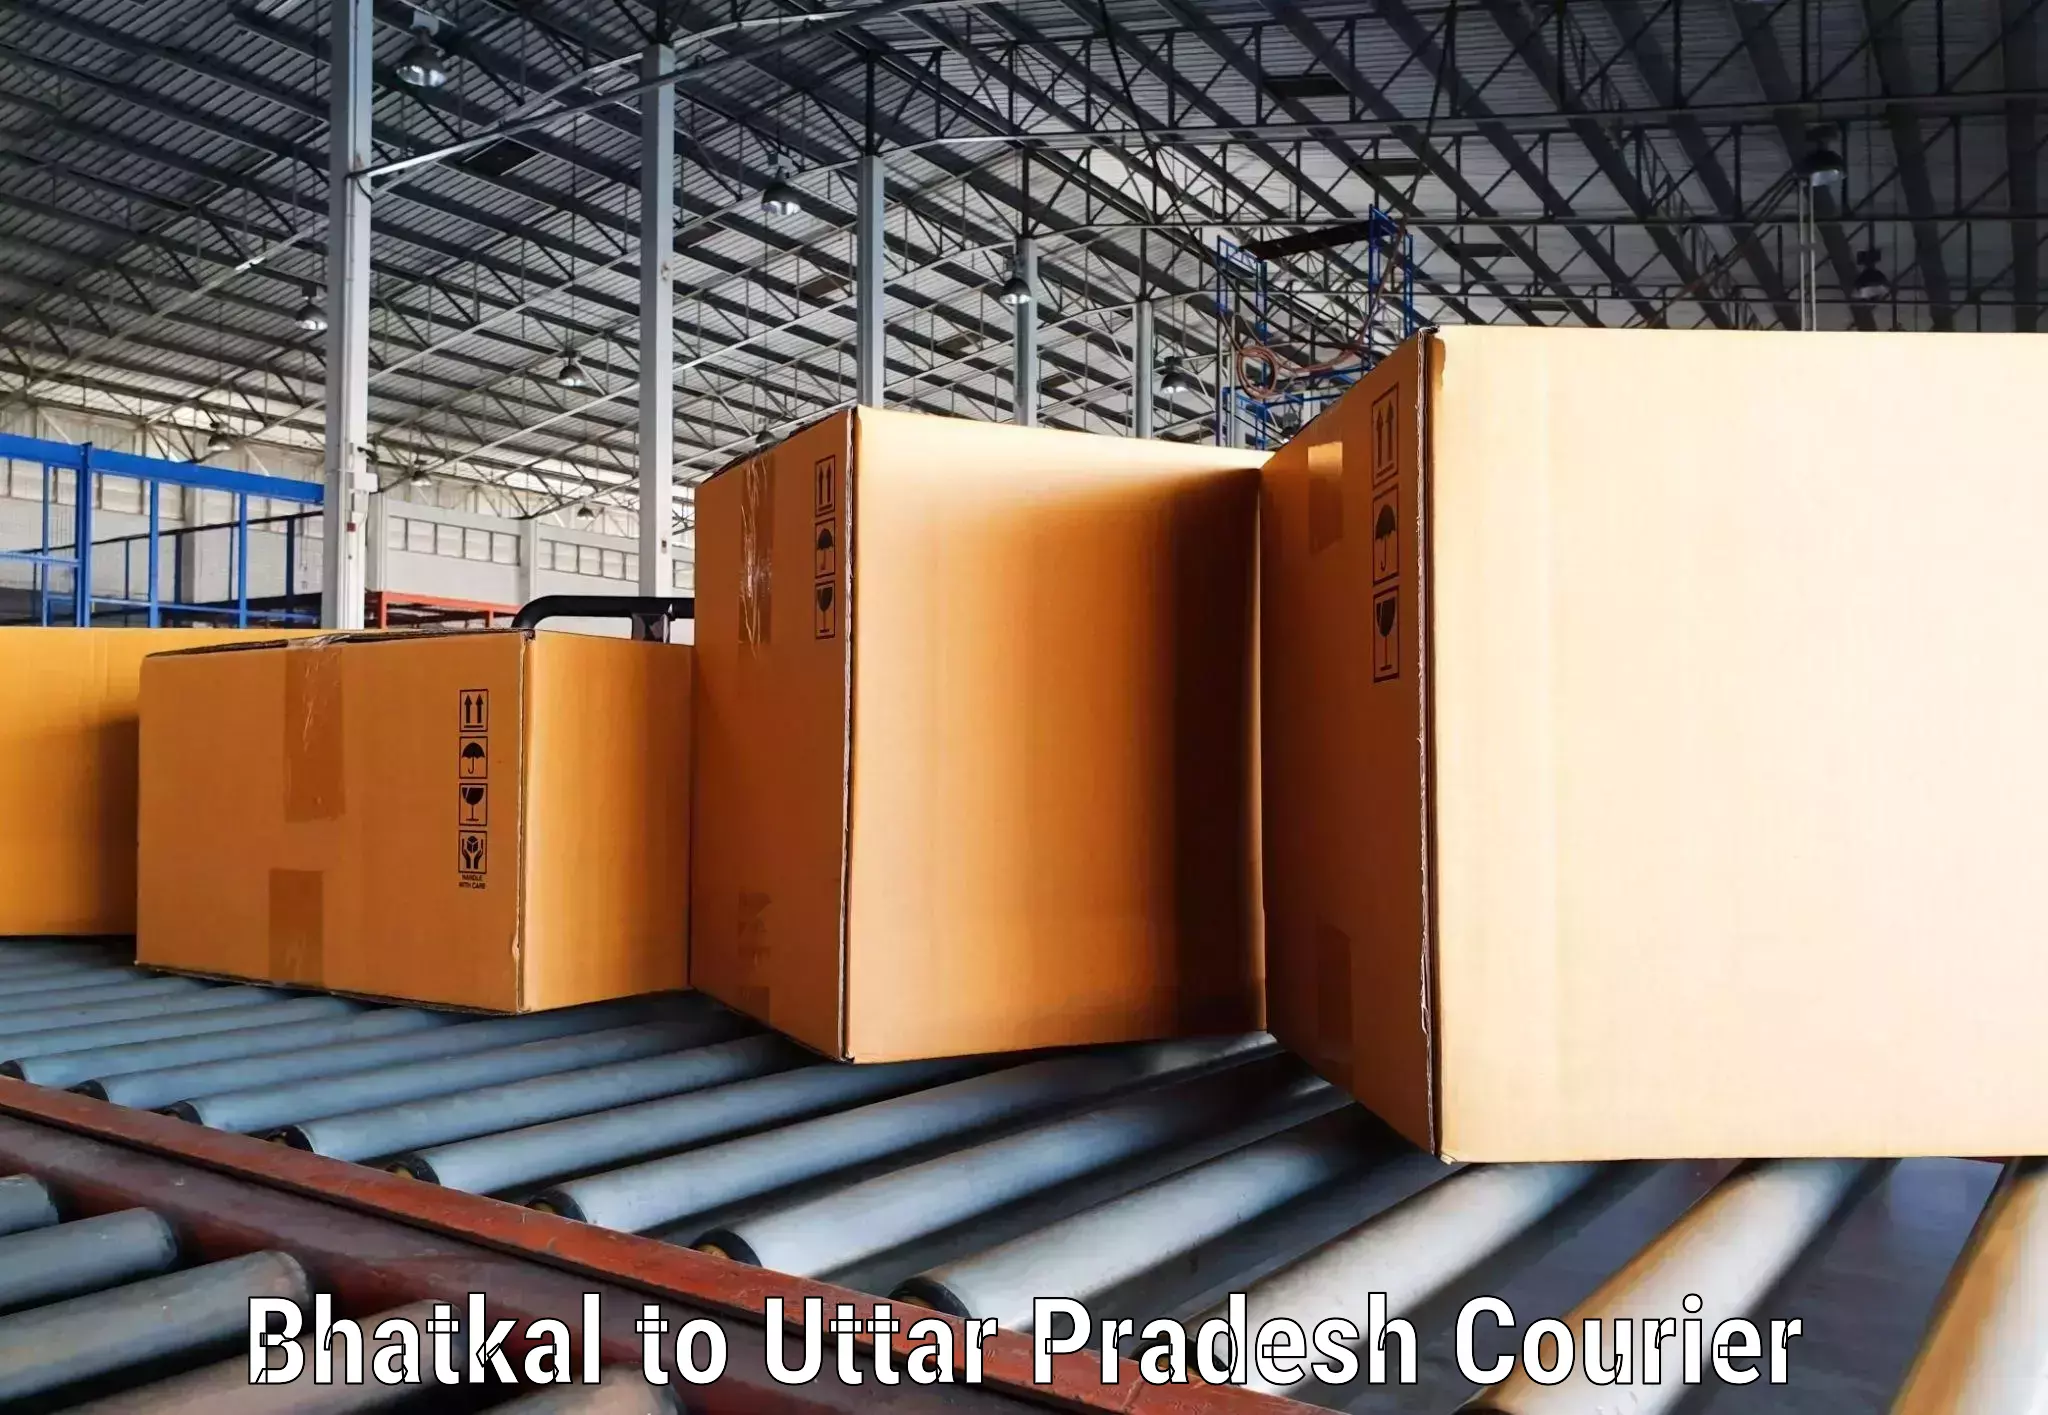 Reliable parcel services in Bhatkal to Bahraich